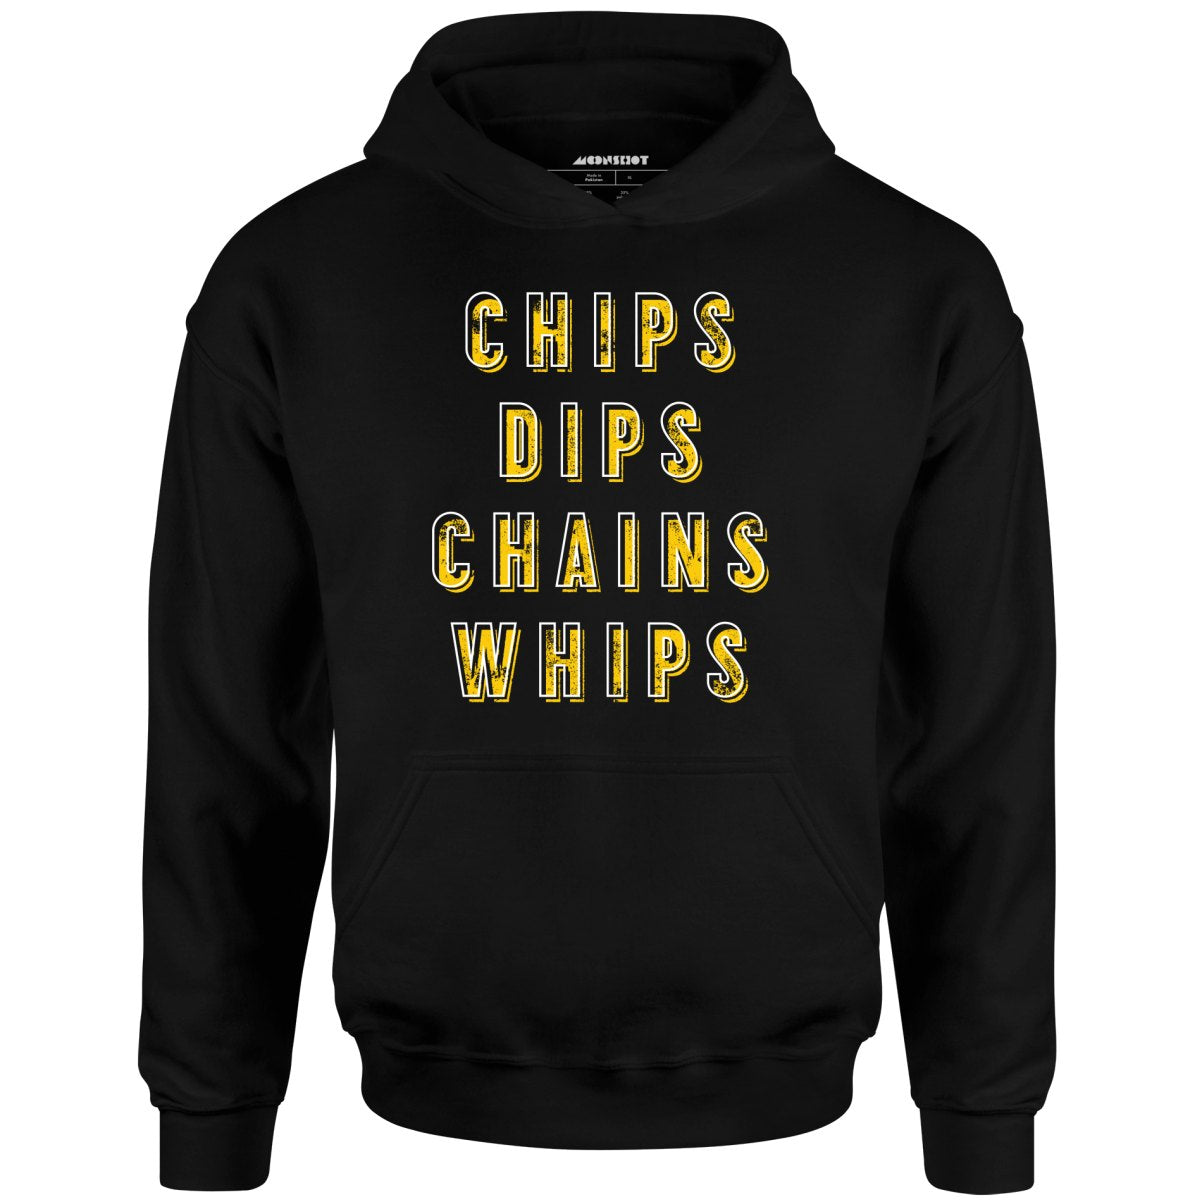 Chips Dips Chains Whips - Unisex Hoodie